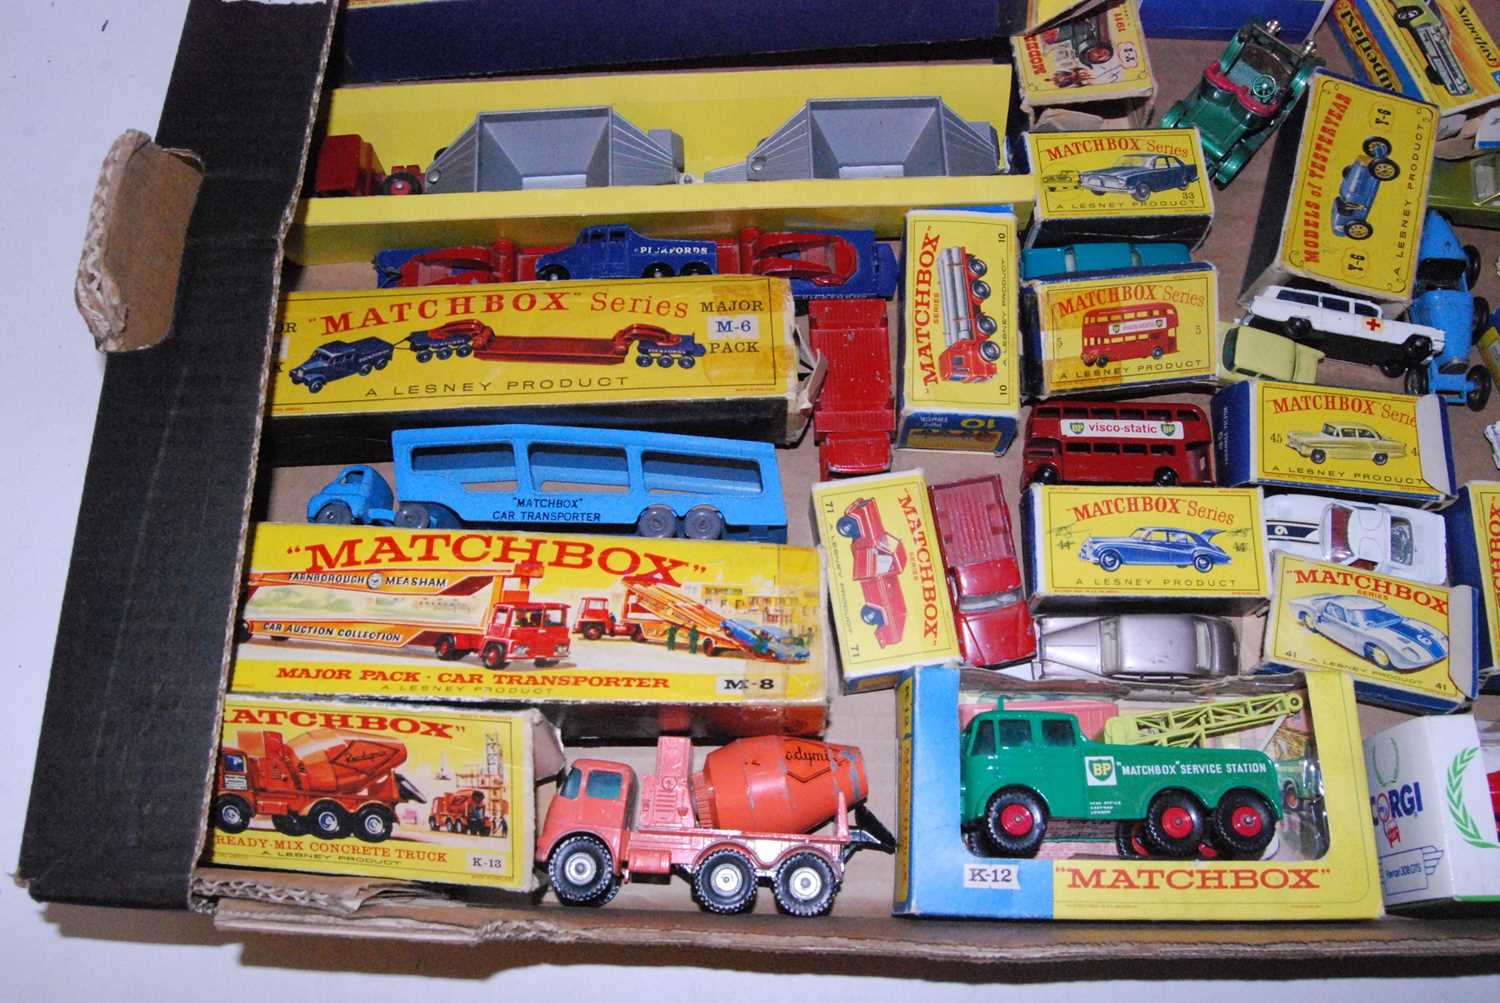 Matchbox group job lot in one tray contains 20+ models in various conditions from mainly poor to - Image 2 of 5